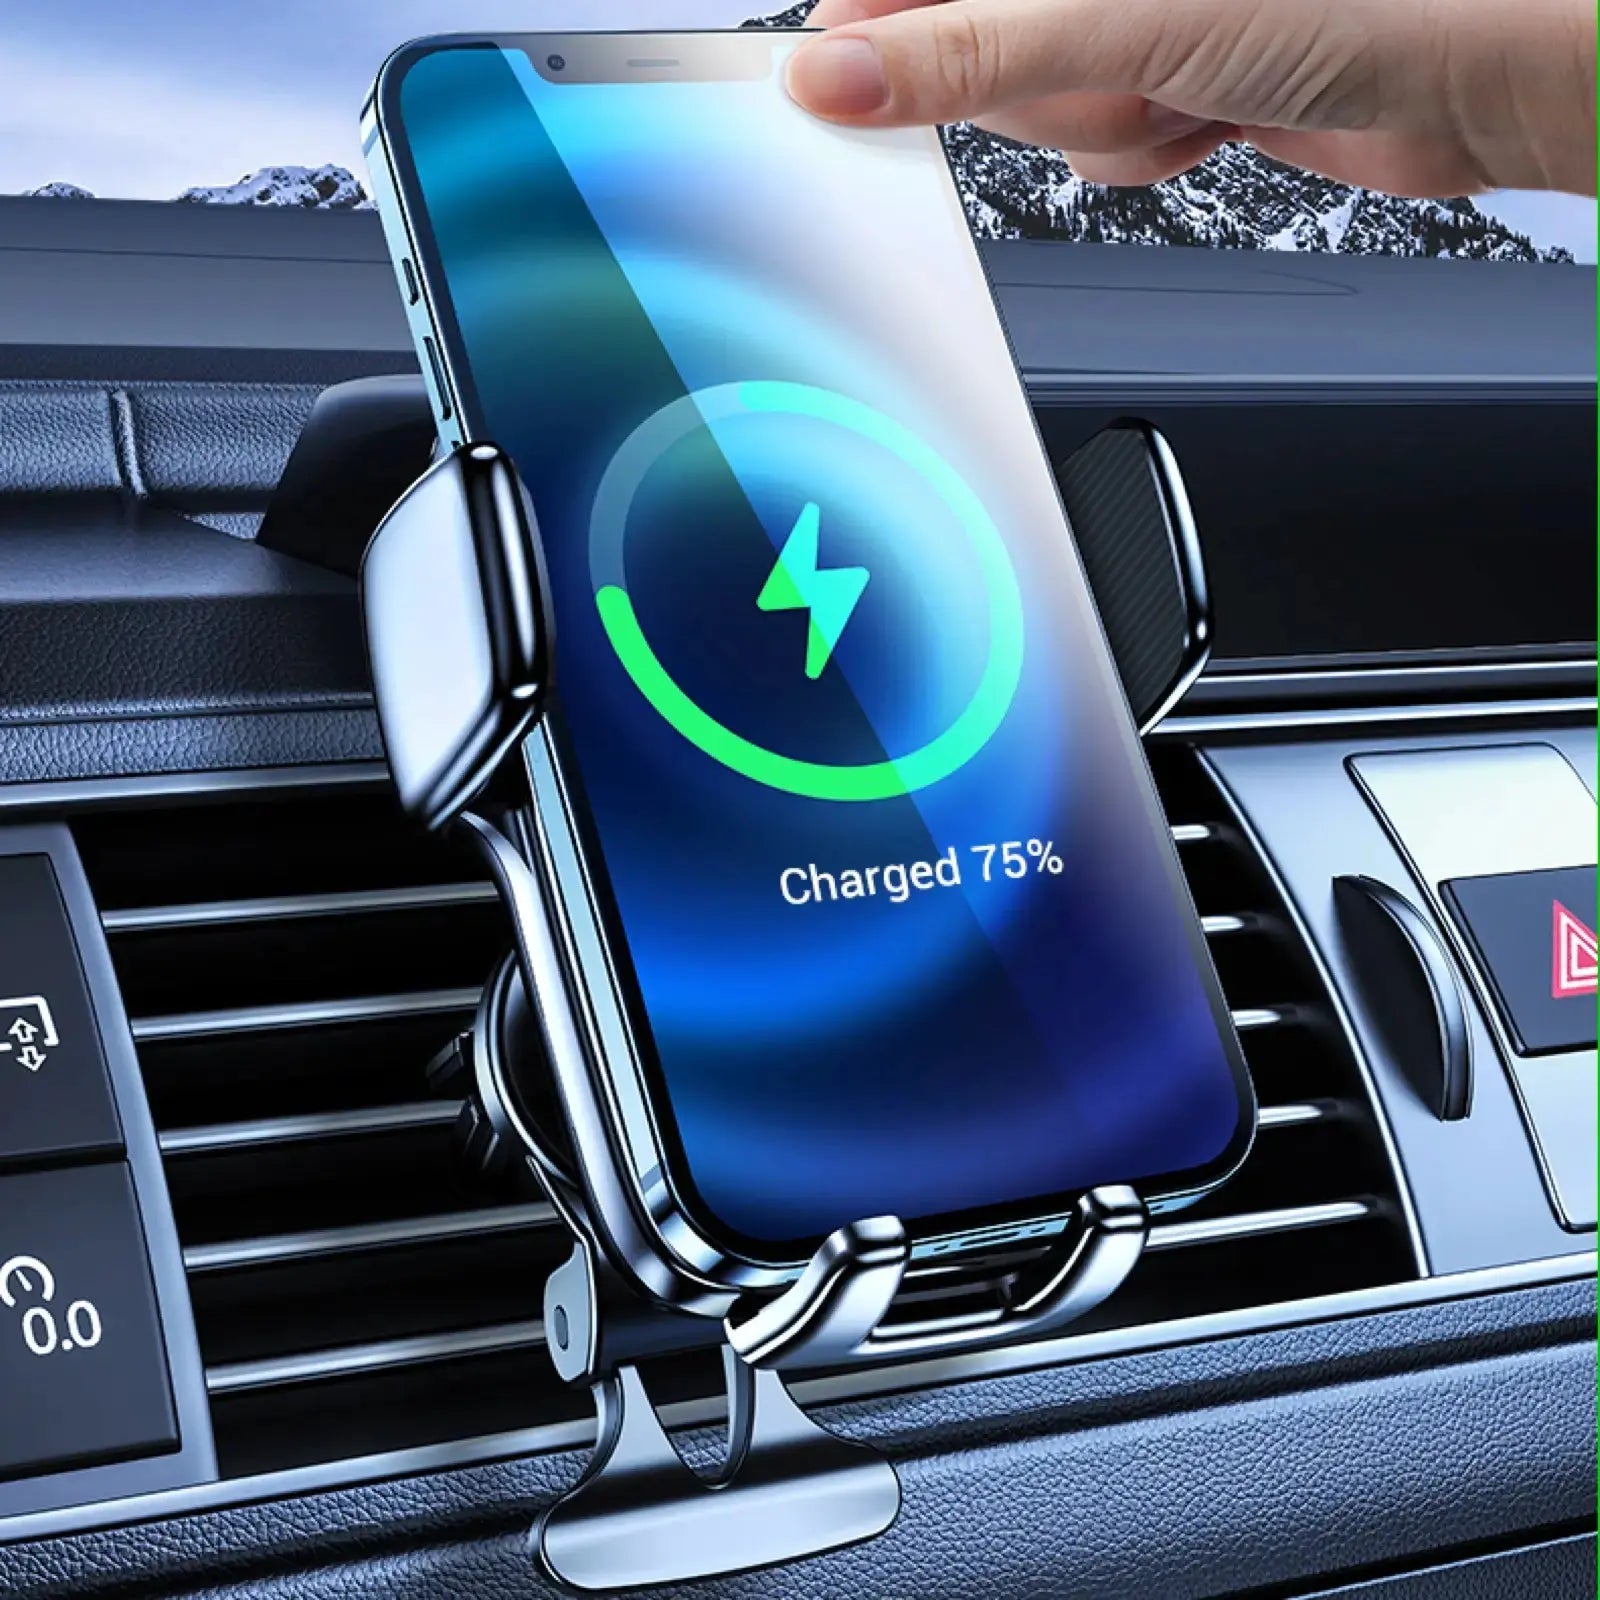 Auto Clamping Car Phone Mount, Wireless Car Charger Cool Gadget